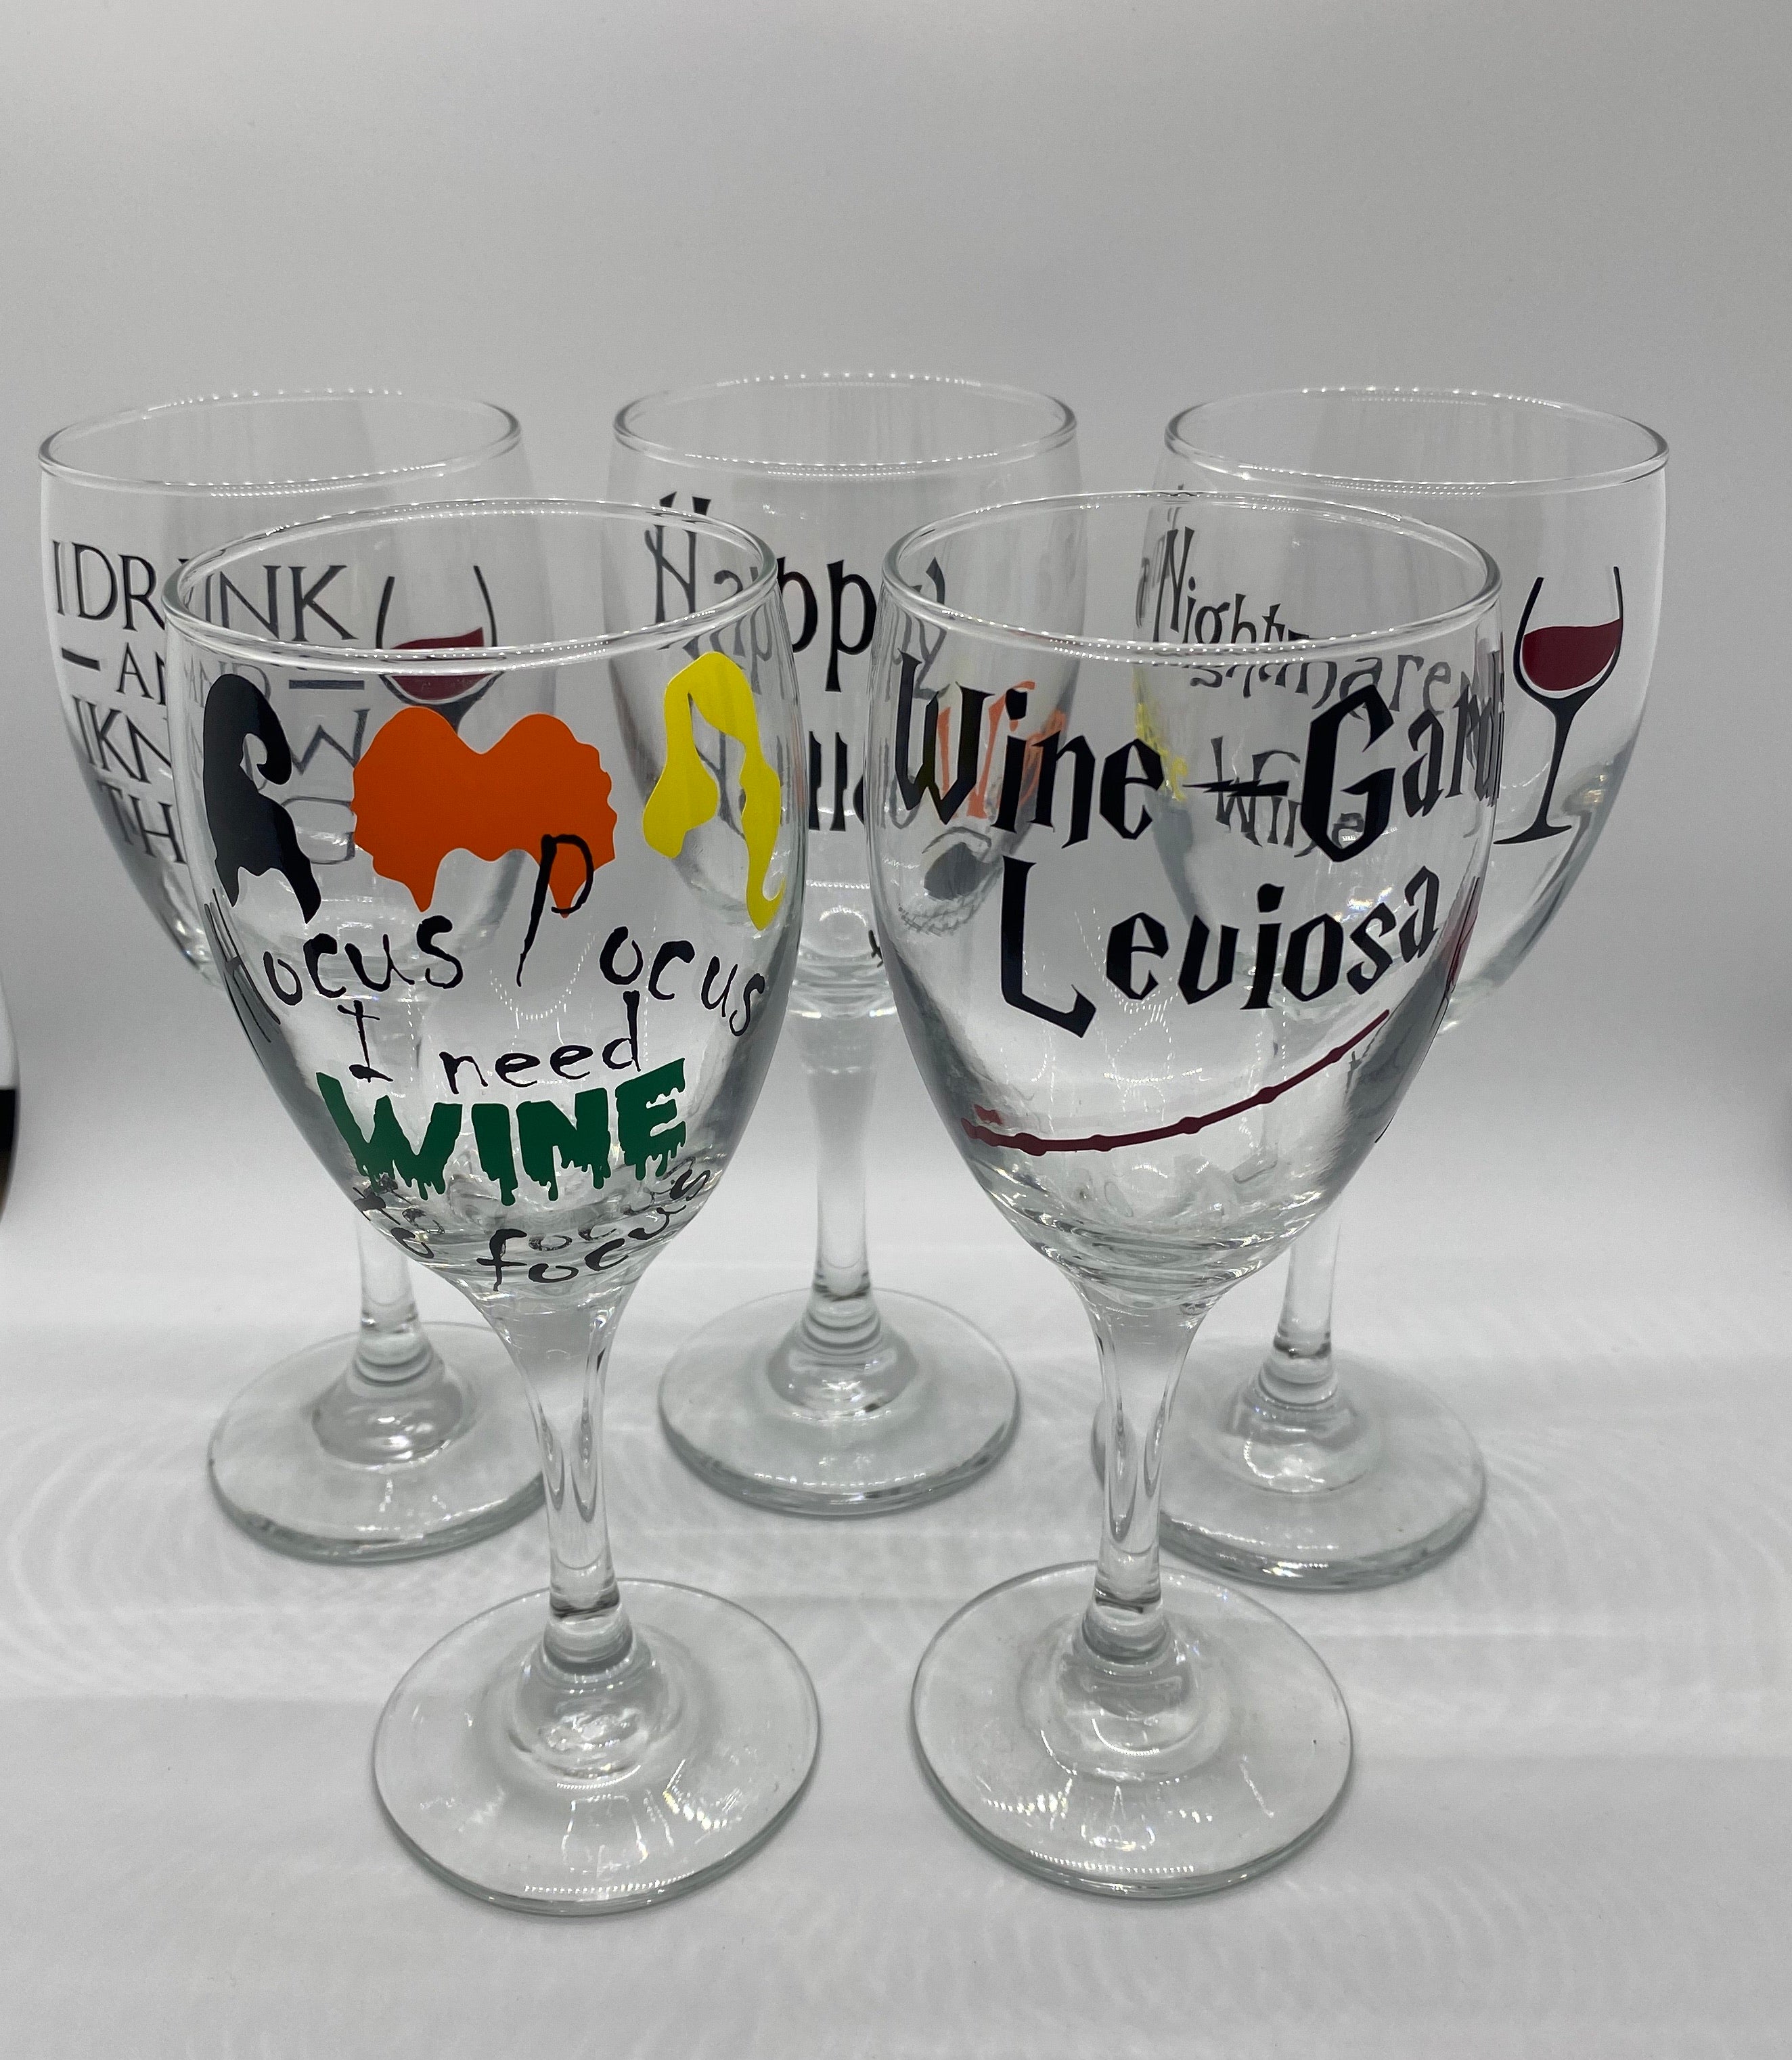 Pack of 3 Wine Glasses Star Wars Inspired – MWimi's Collection